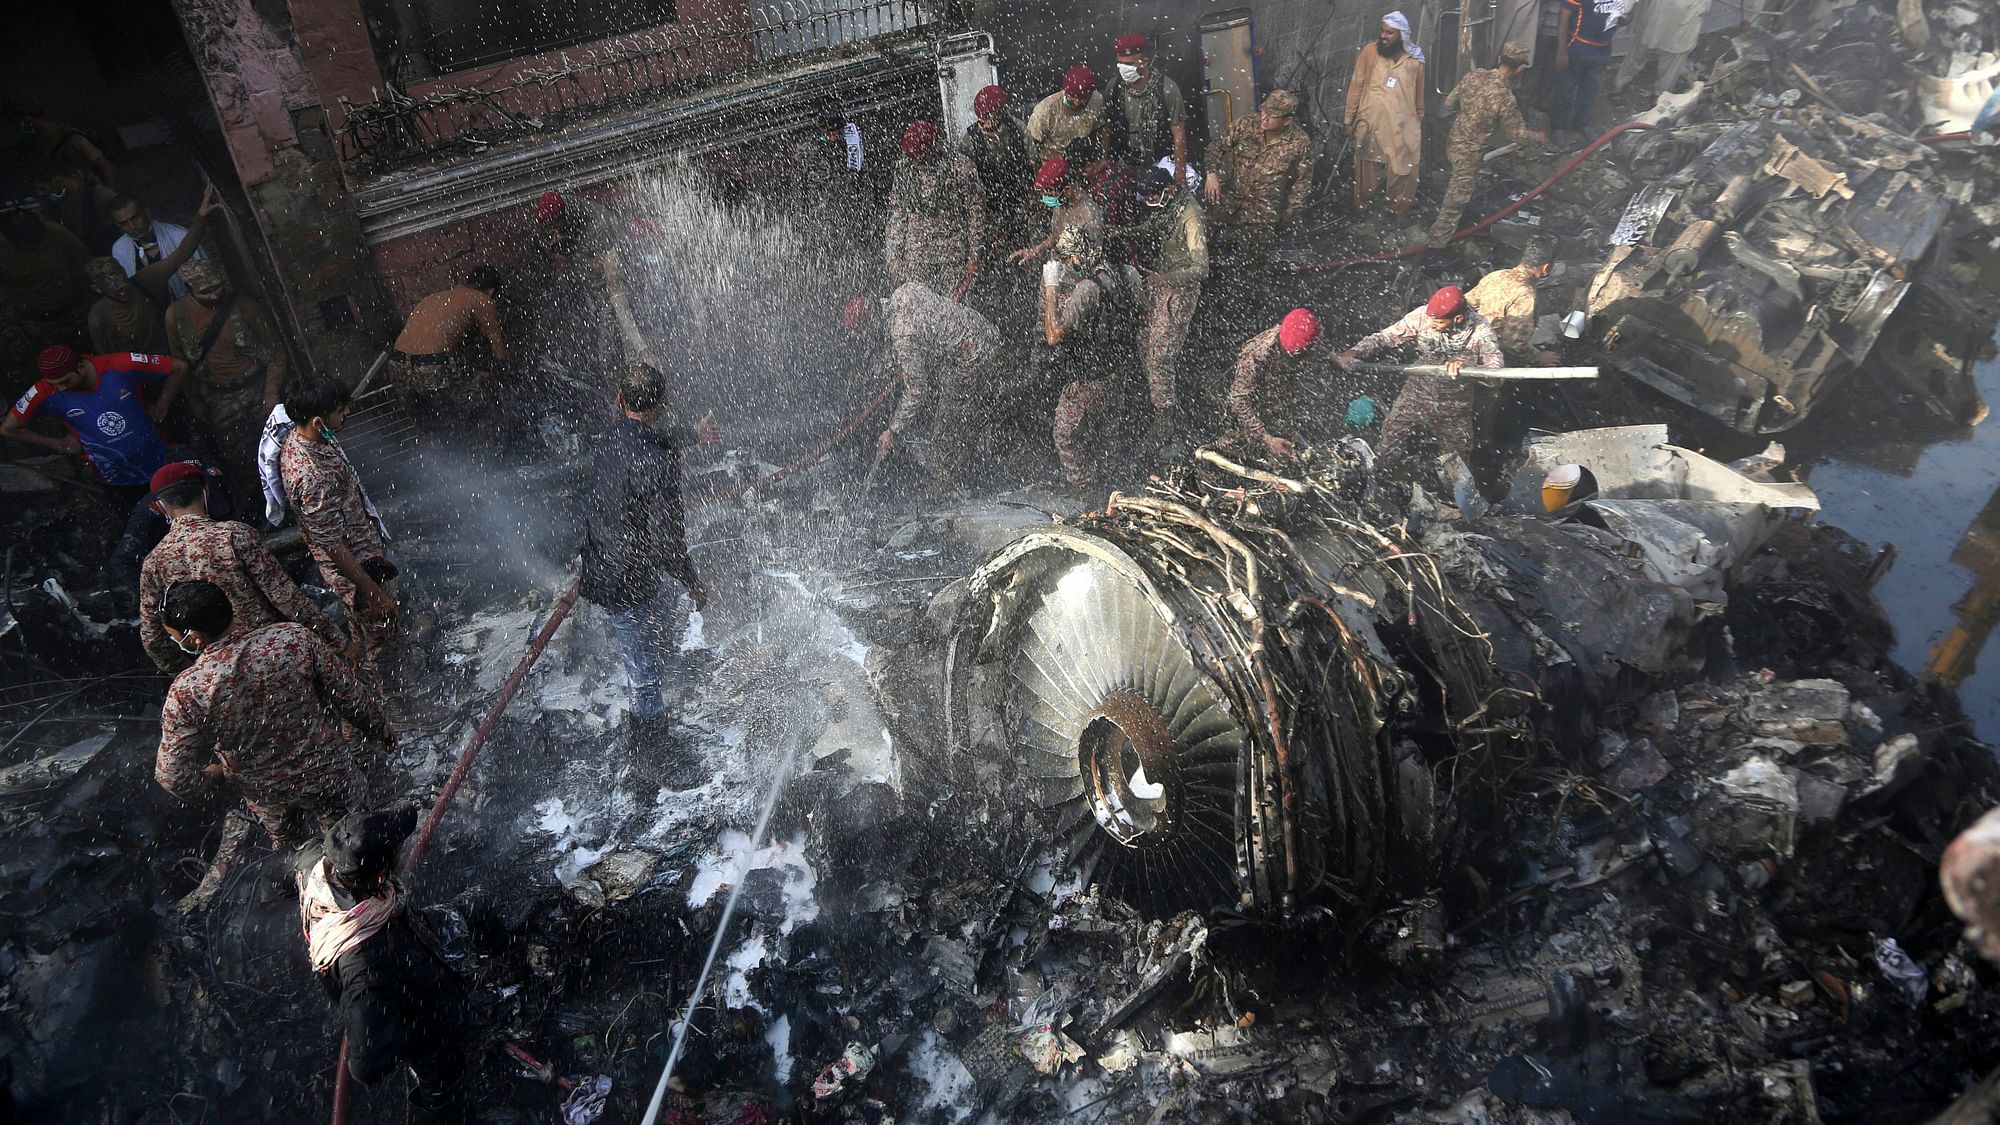 A Pakistan Airlines flight crashed in Model Colony, a residential neighborhood located around two miles north-east of Karachi’s Jinnah international airport.